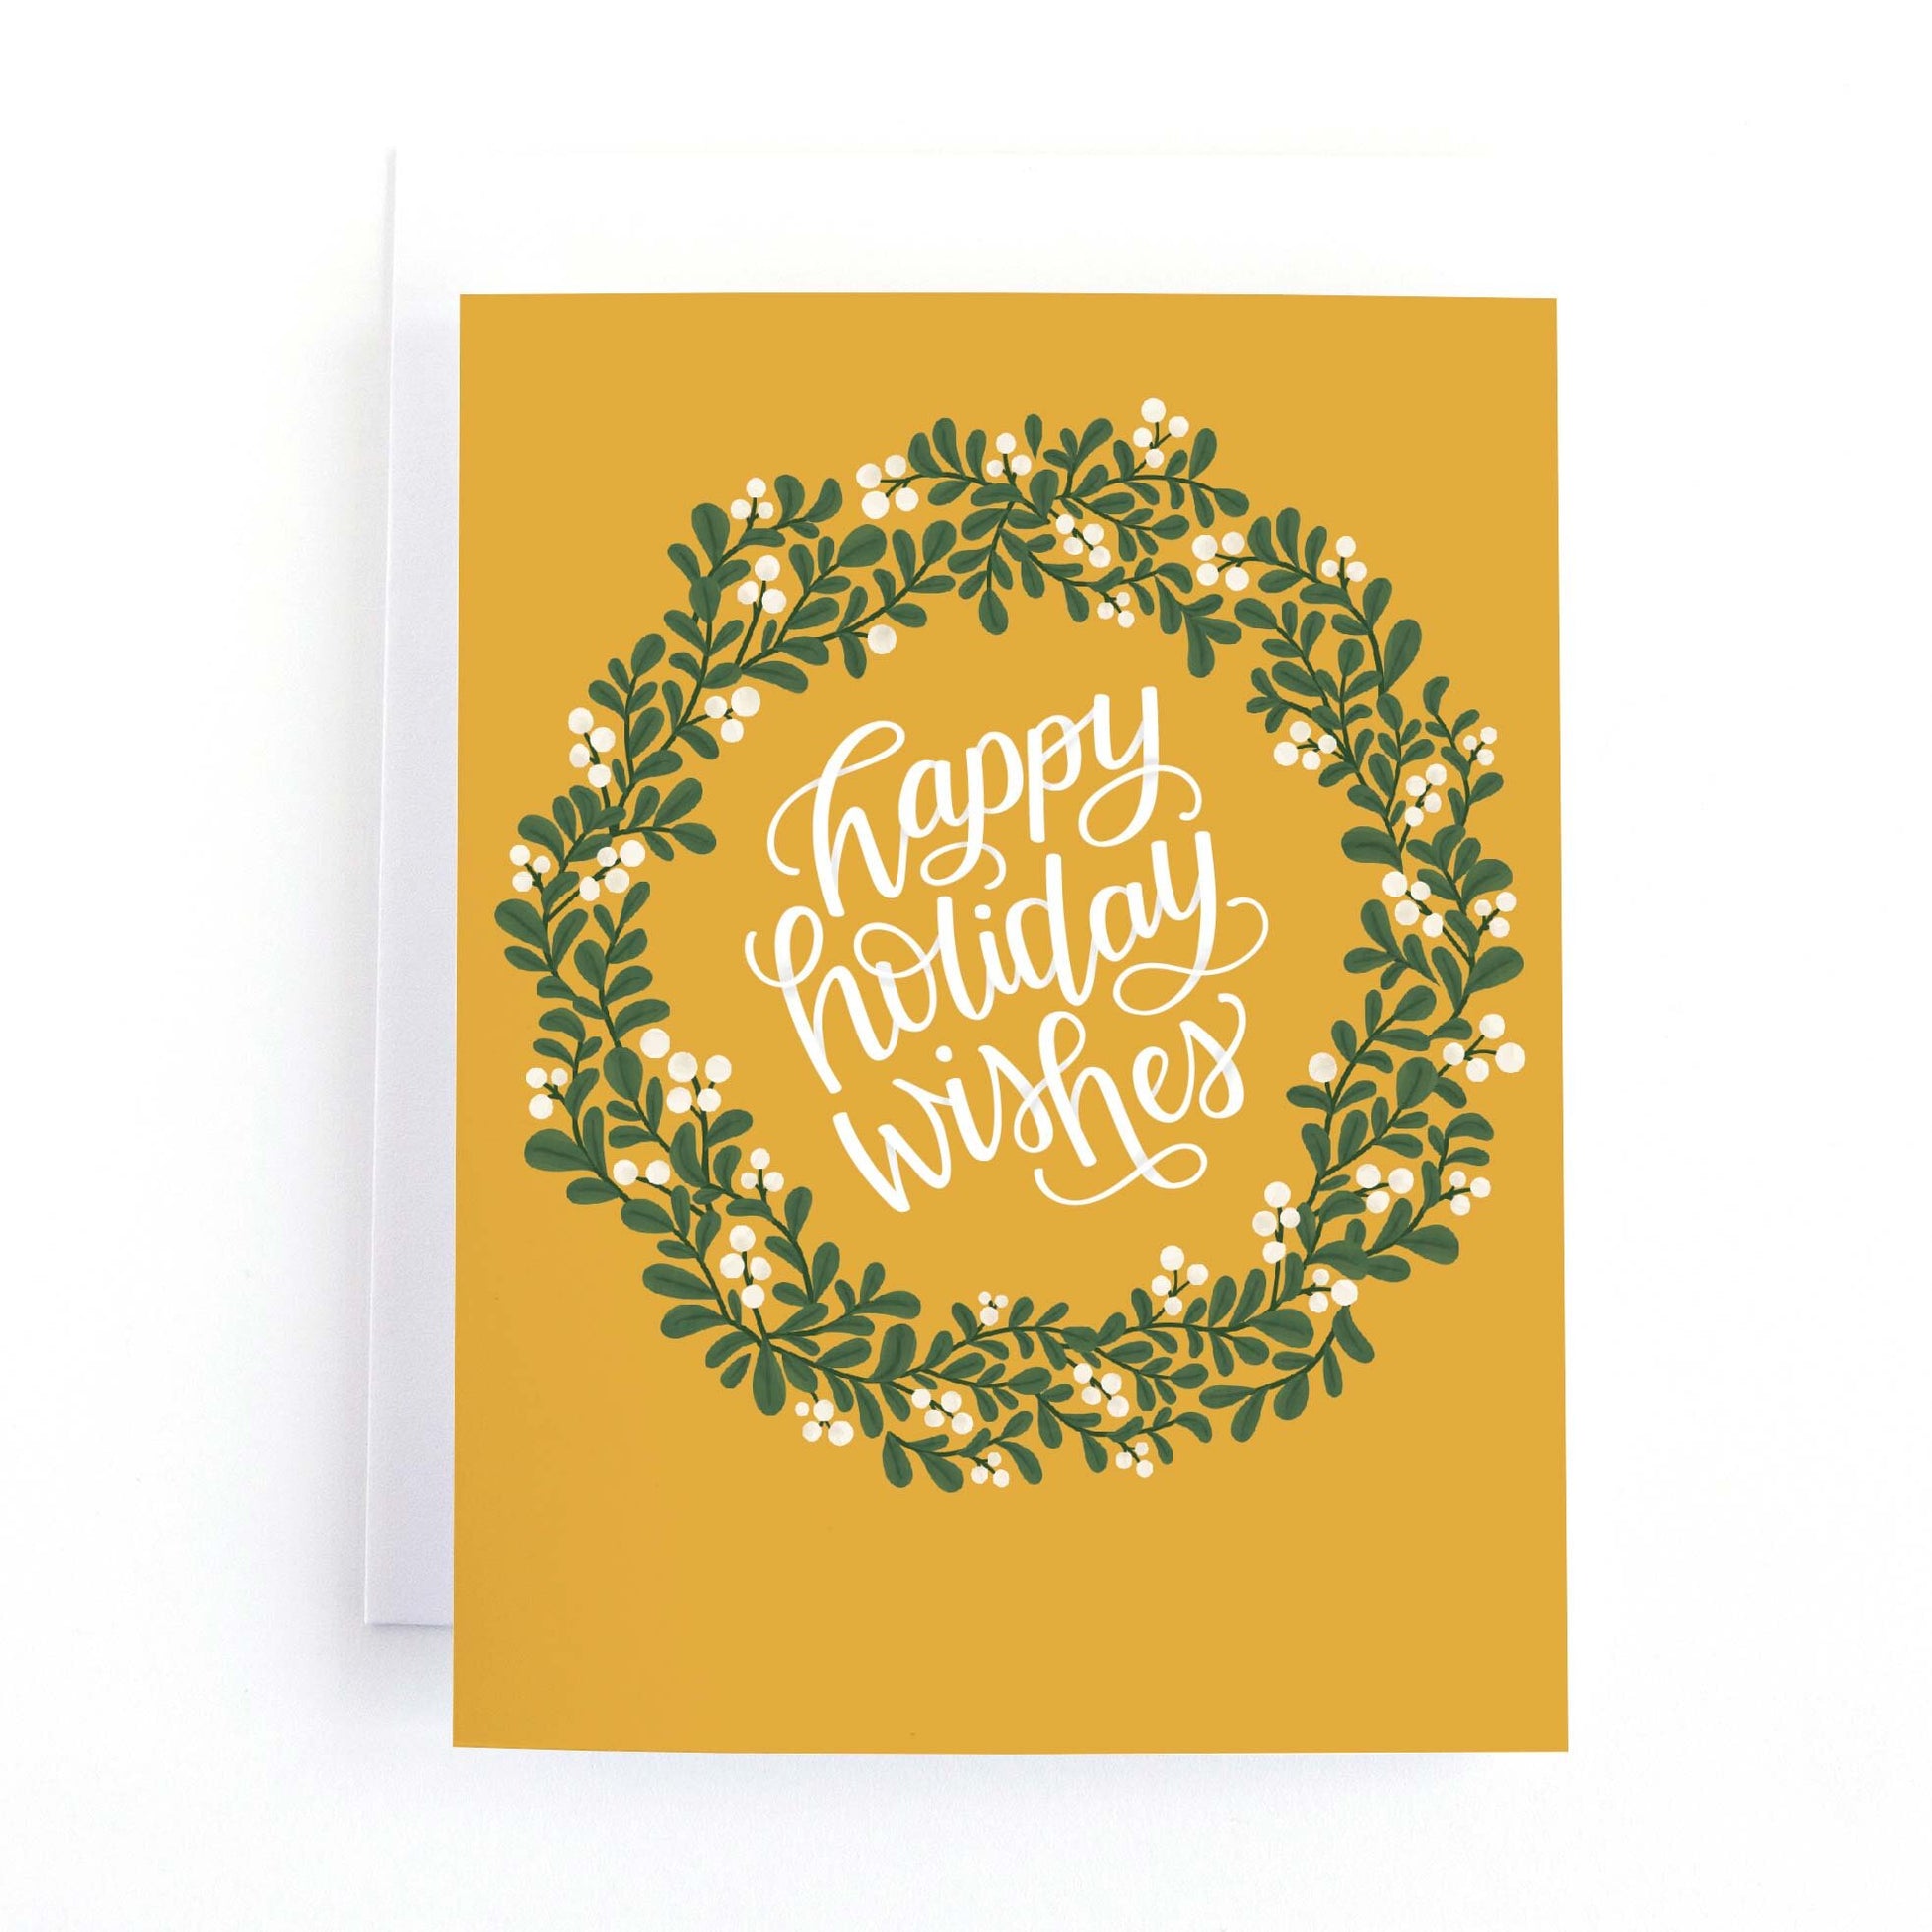 Yellow holiday card with and christmas wreath of mistletoe greenery and berries and the hand lettered message happy holiday wishes